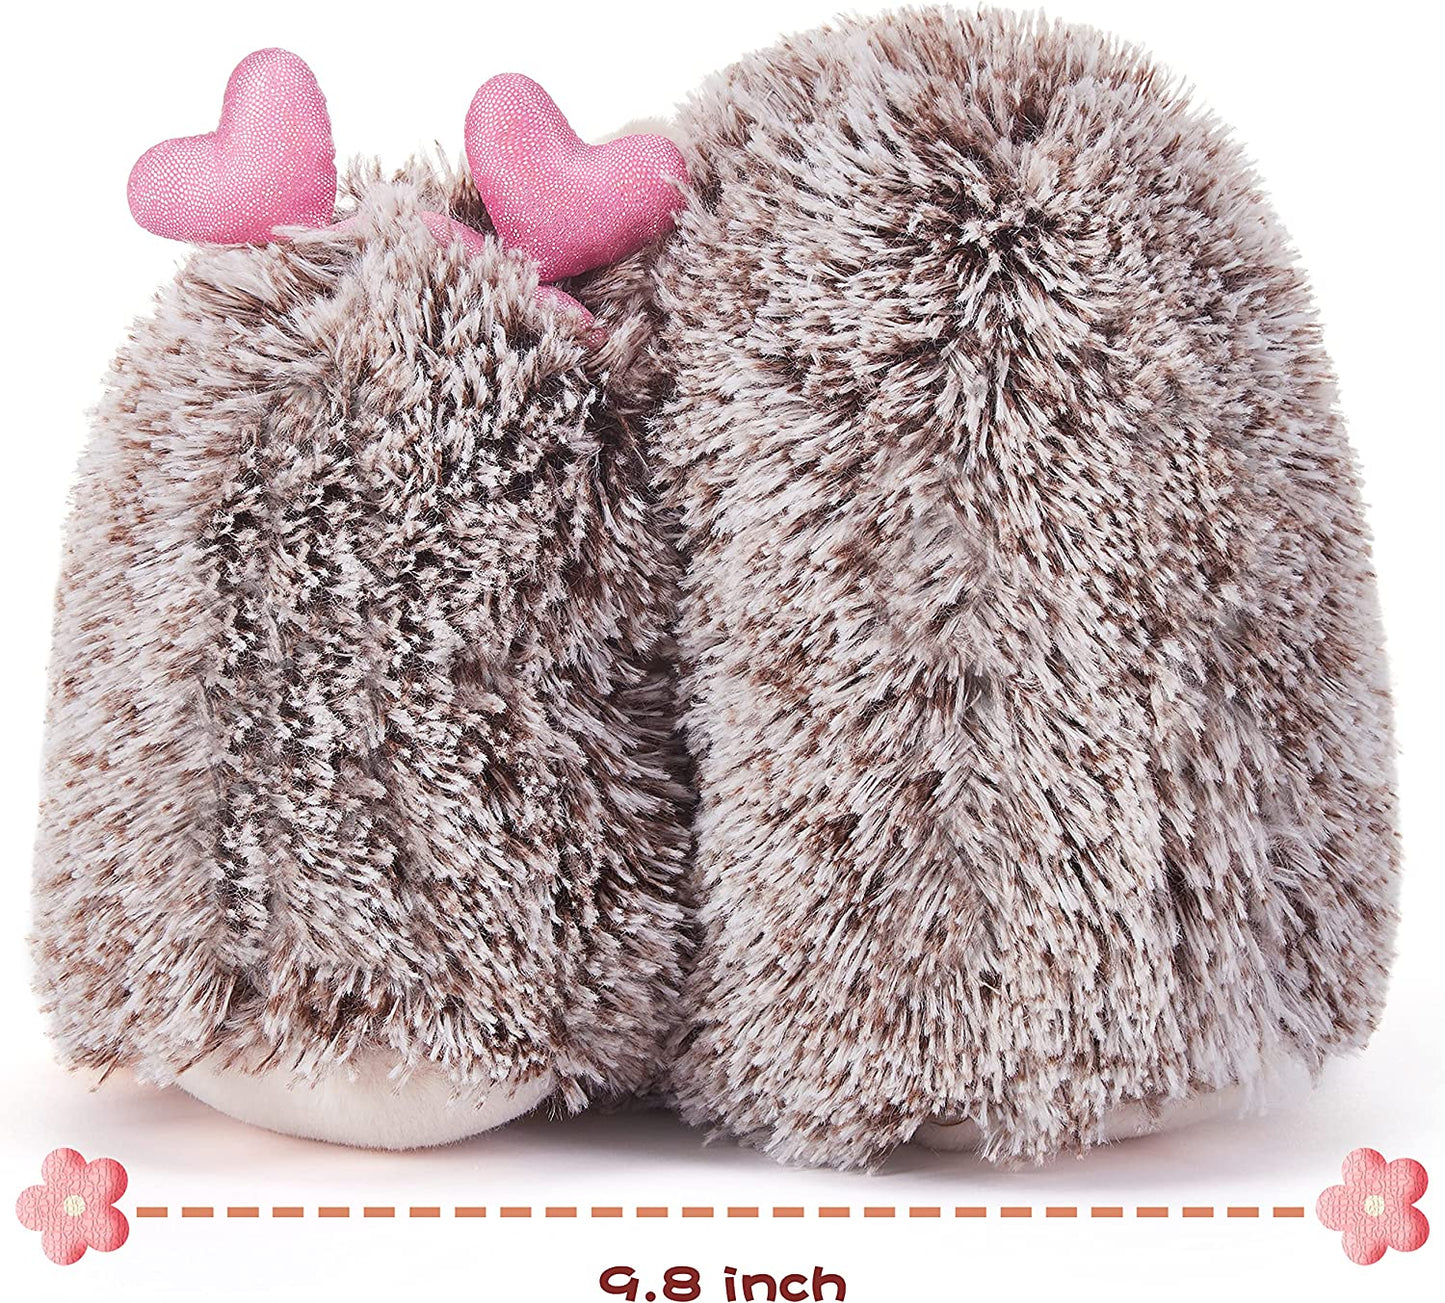 Hedgehog Stuffed Animal Plush Toy Holding Heart with Love Heart,Pair of Cute 20Cm Plushie Soft Small Toy,Valentine’S Day Gifts for Girlfriend